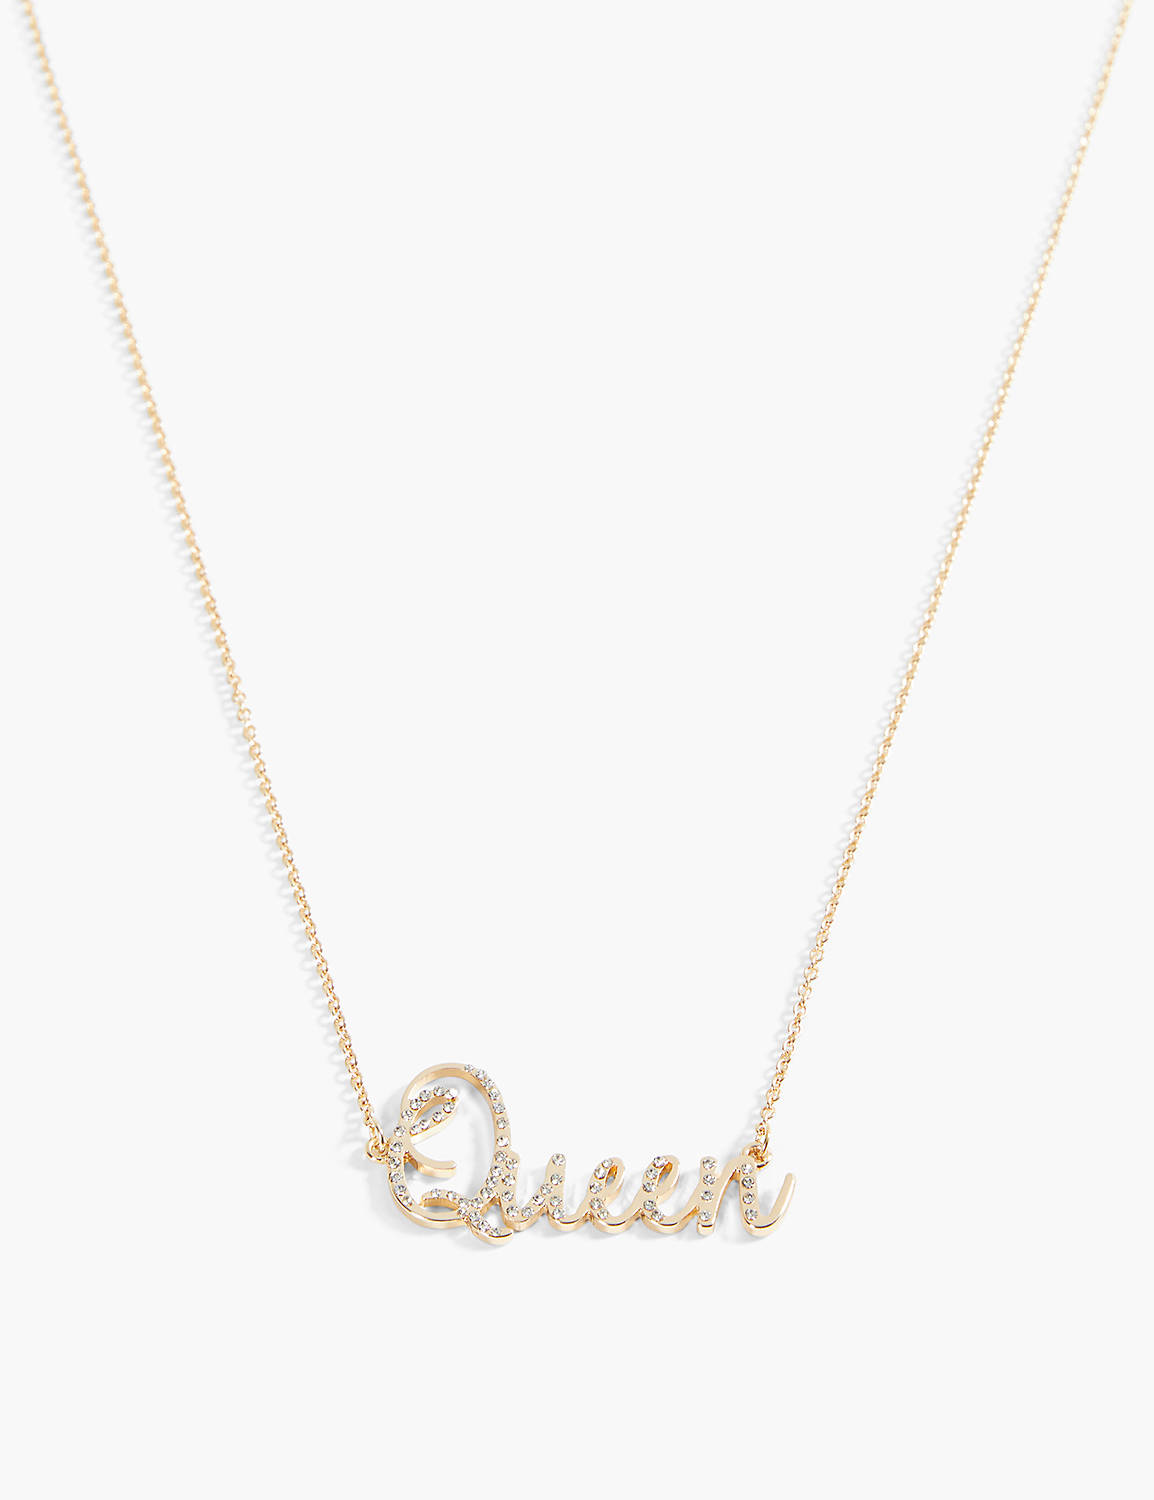 Pave Queen Necklace